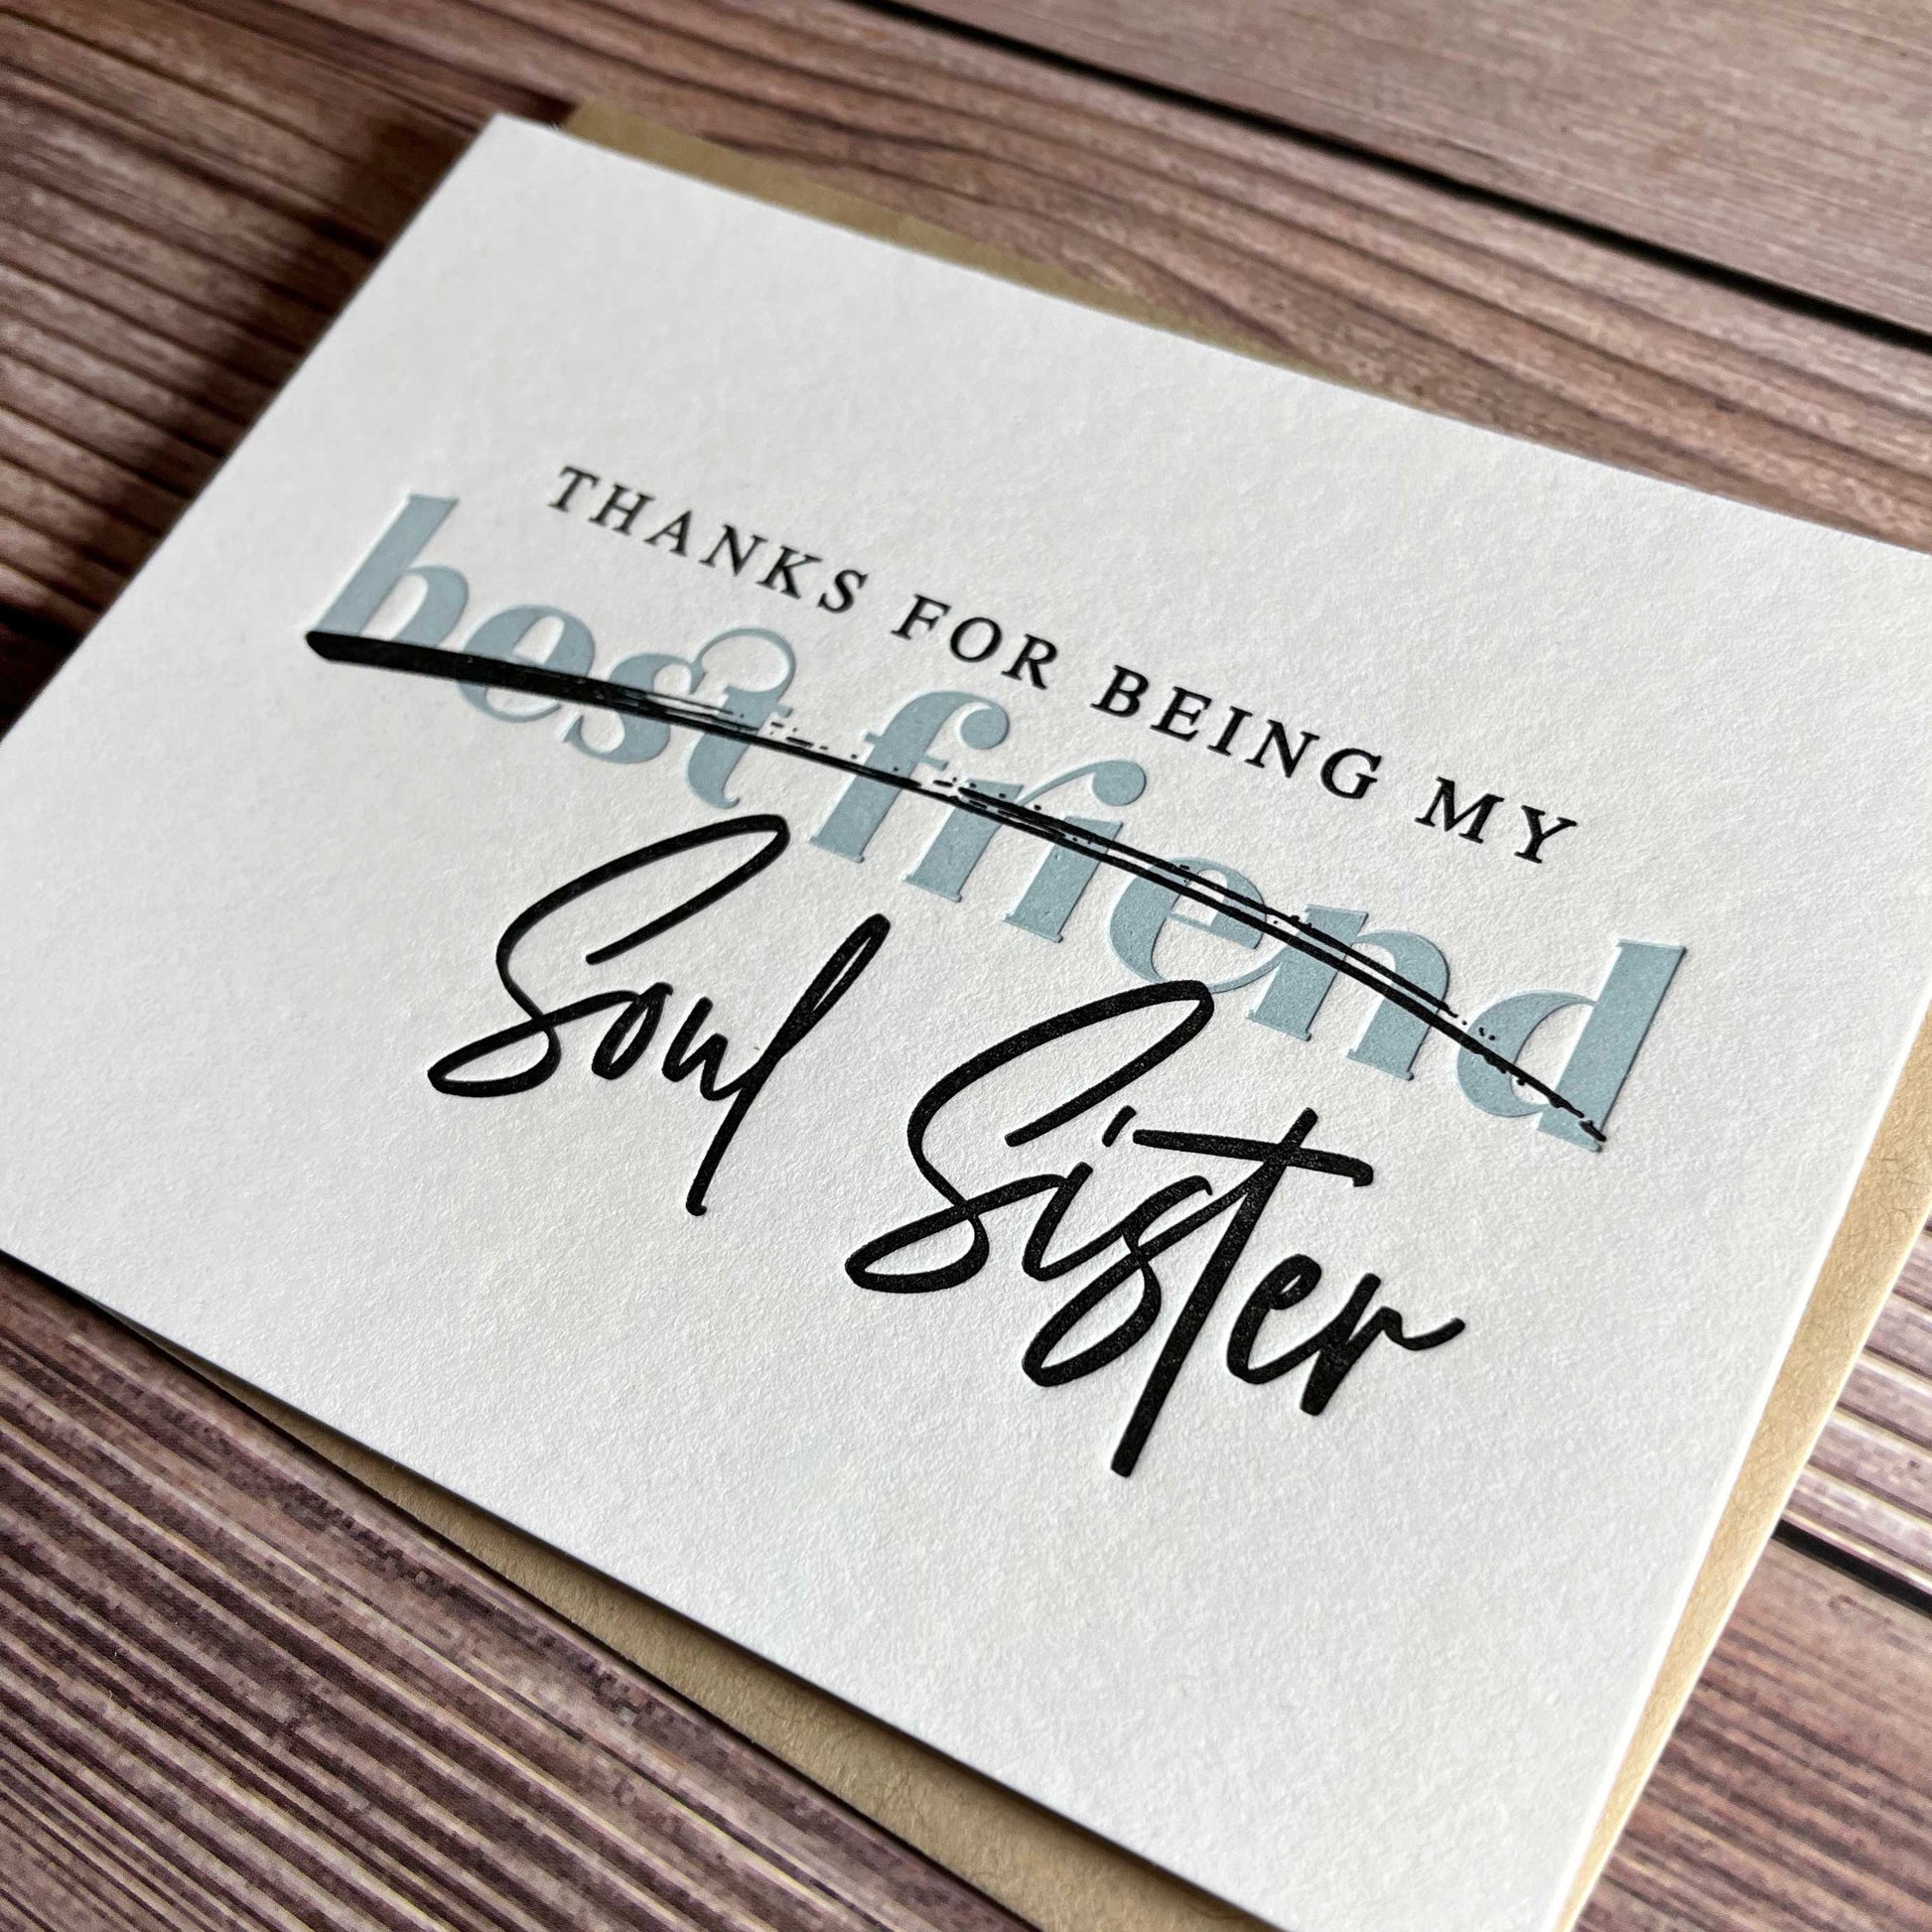 Thanks for being my soul sister, best friend is crossed out and replaced with Soul Sister, best friend thank you card, Letterpress printed, view shows letterpress impression, includes envelope